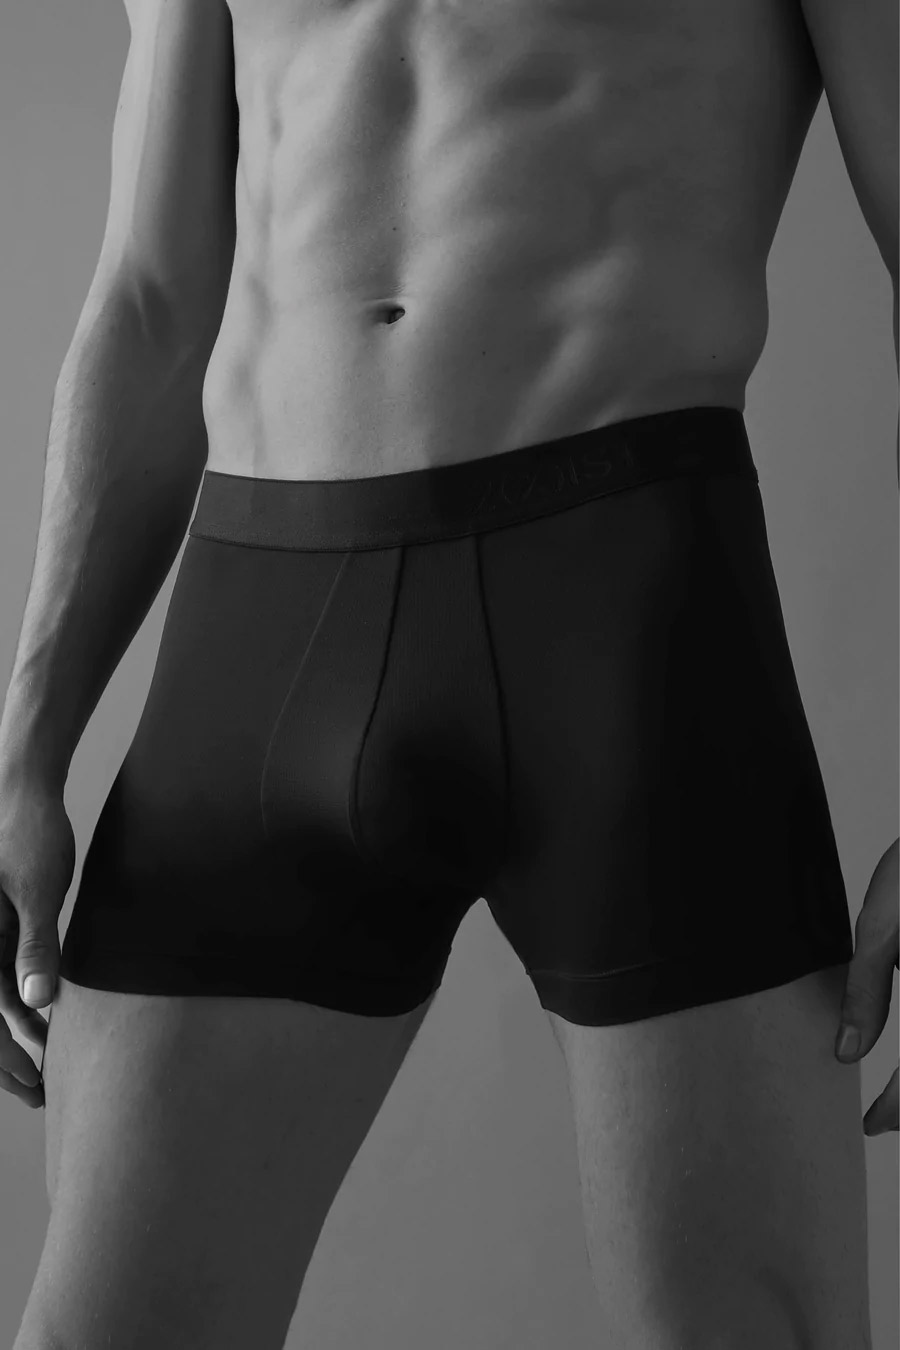 Best Gay Sexy Male Underwear Boxers and Lingerie 